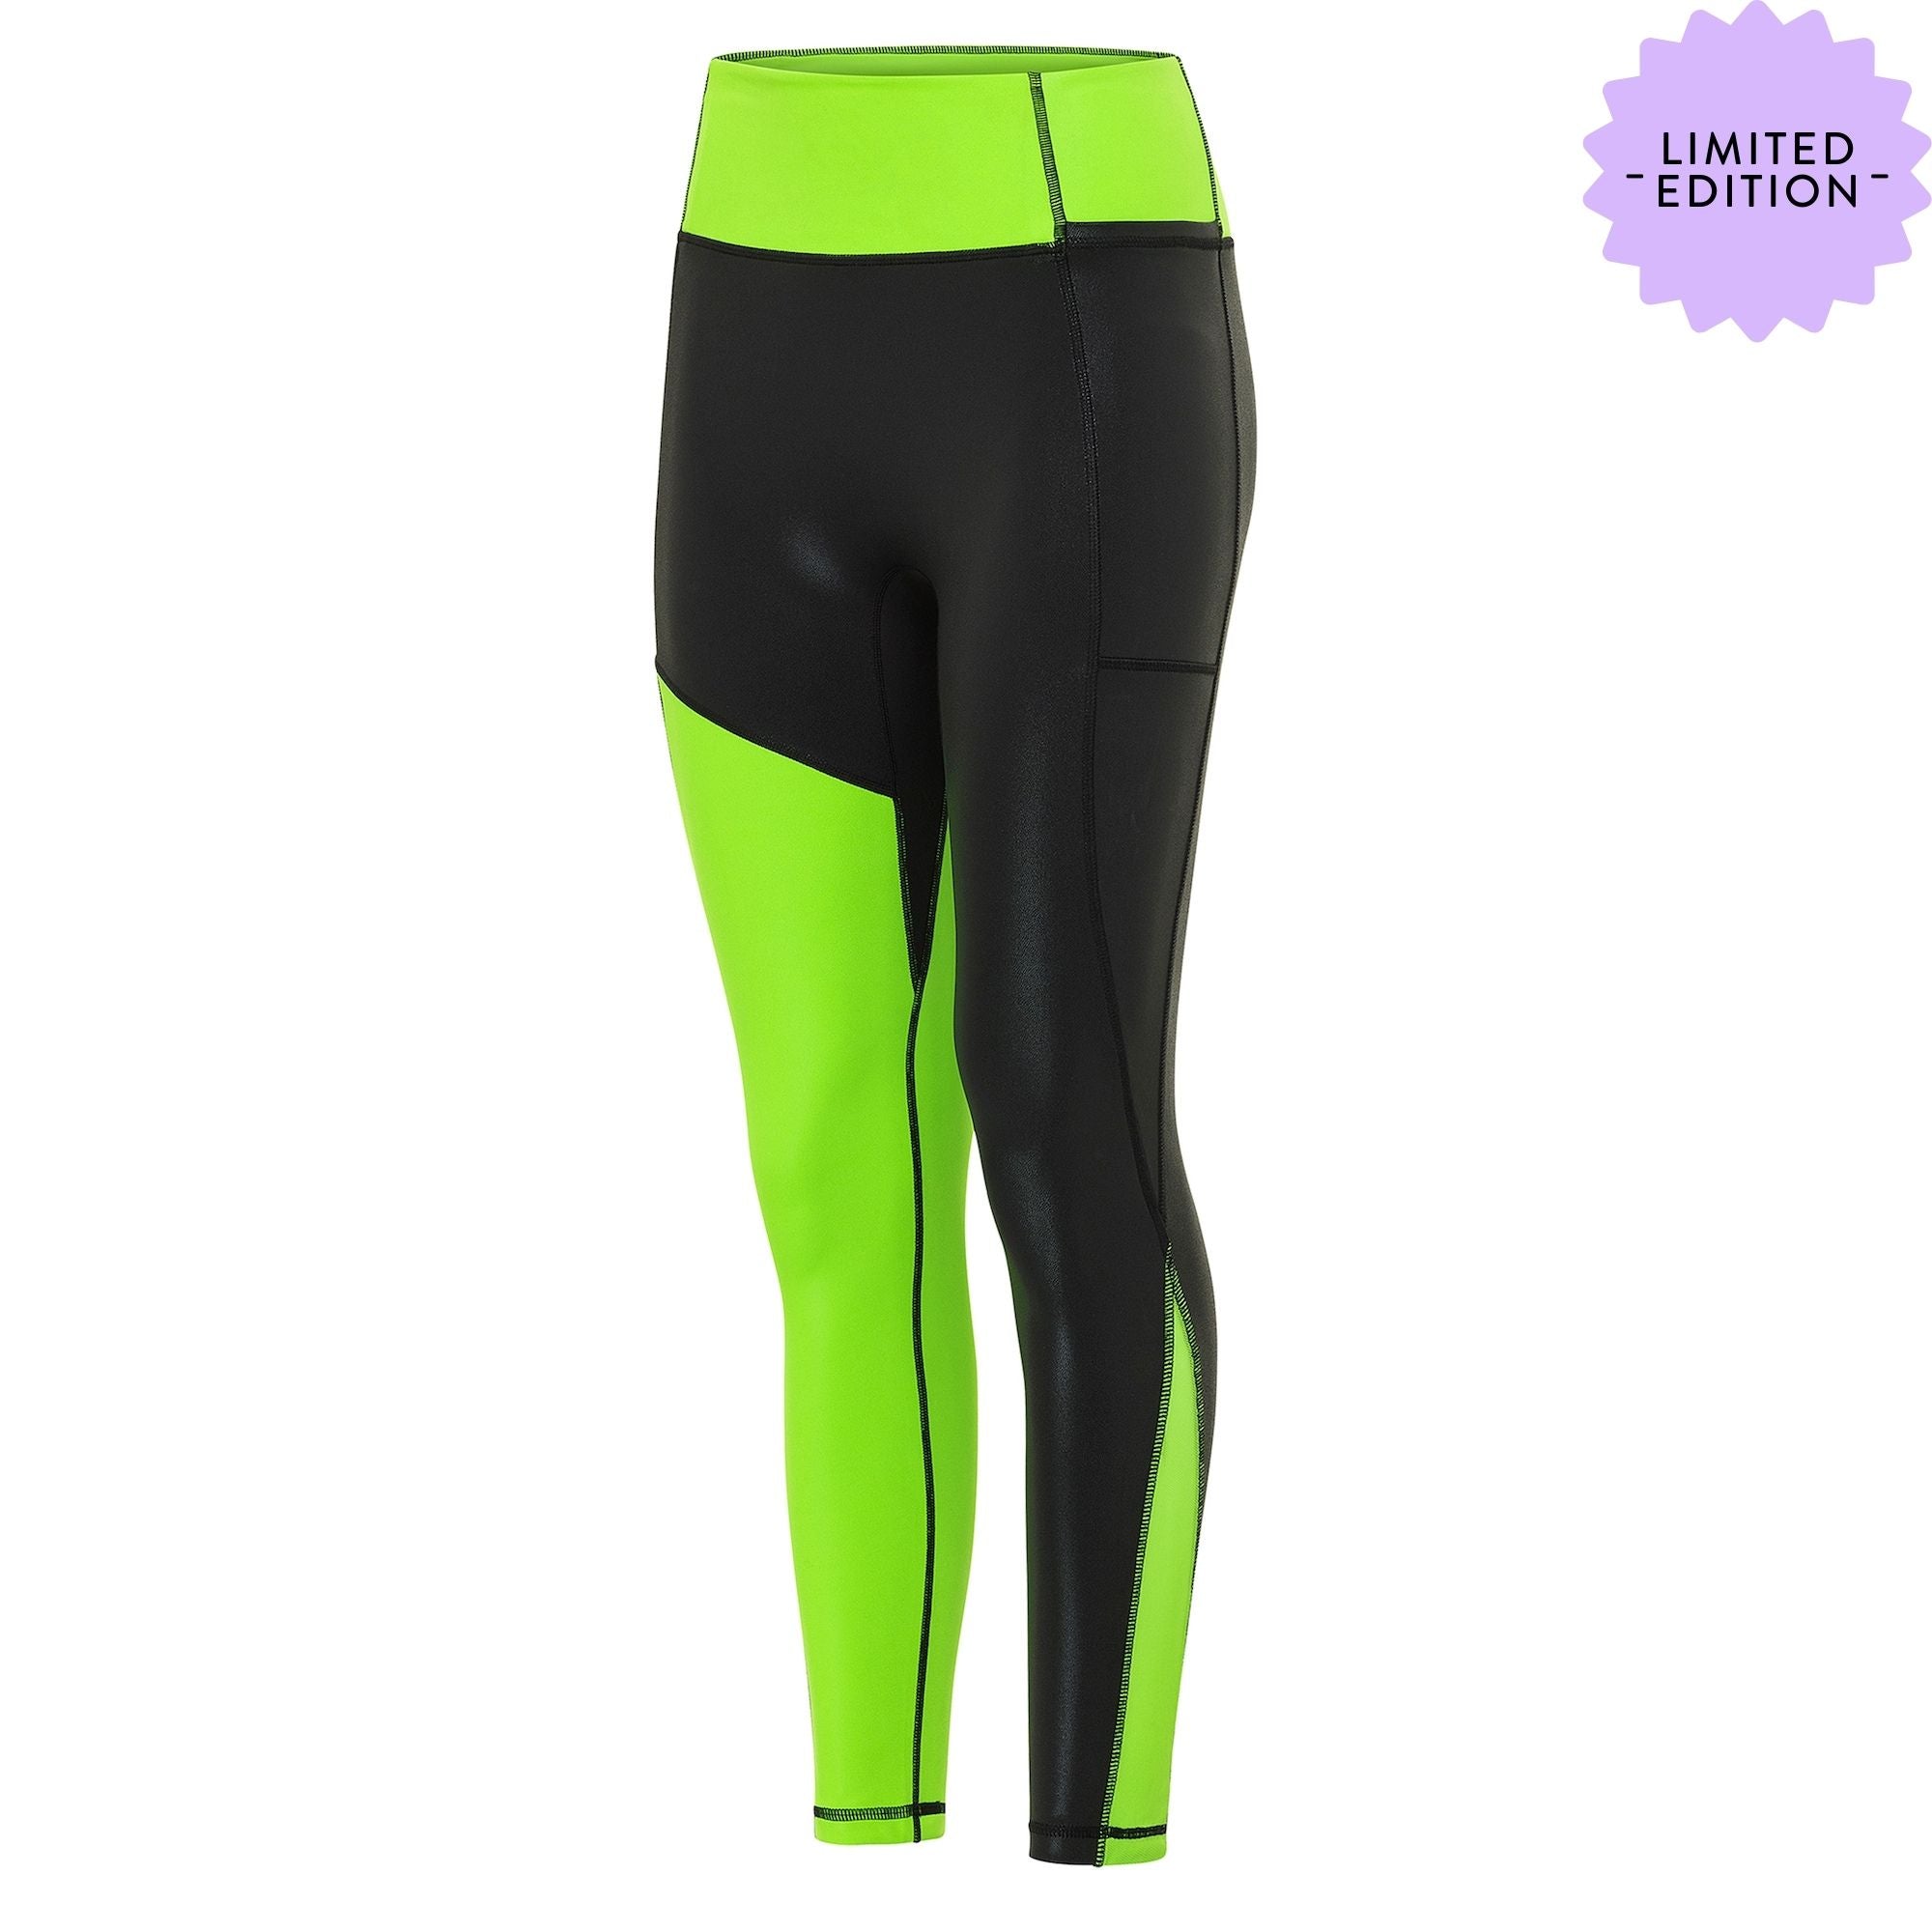 Vogo The Hulk Athletic Tights for Women